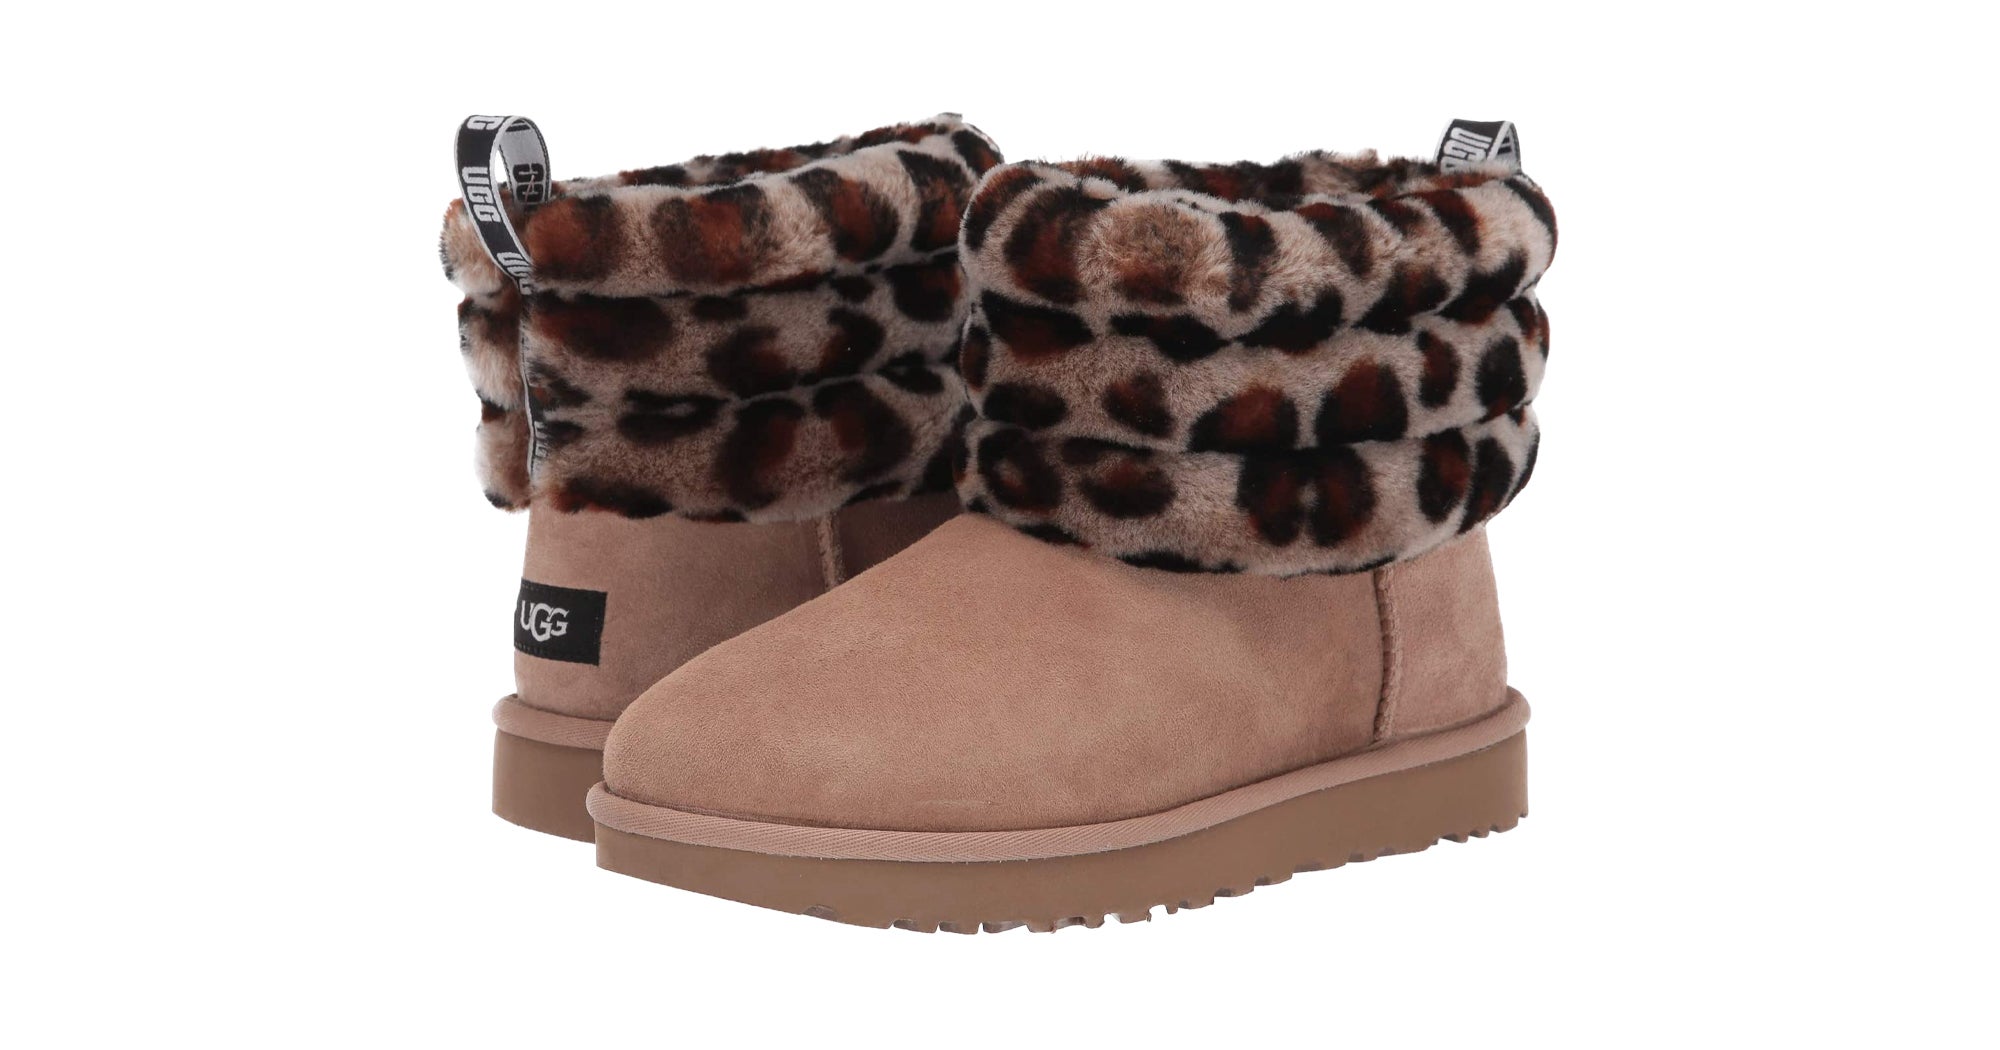 cyber monday deals uggs